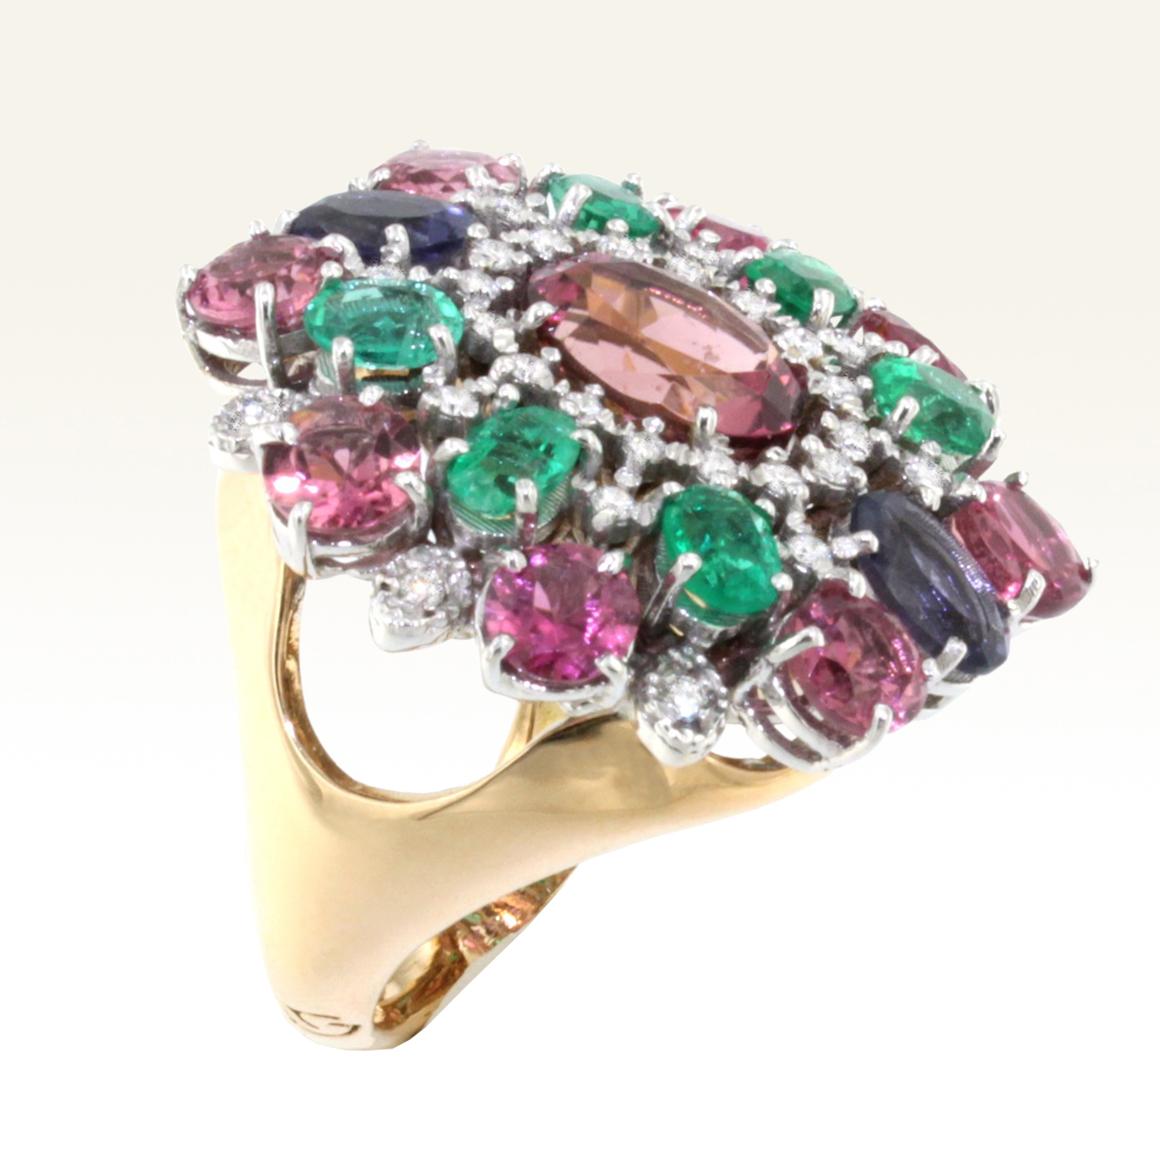 Perfect mix of craftmanship and natural beauty making it impossible to find two of the same kind.
The combinations of stones with intense colors create a very unique ring for important occasions.
Made in Italy by Stanoppi Jewellery since